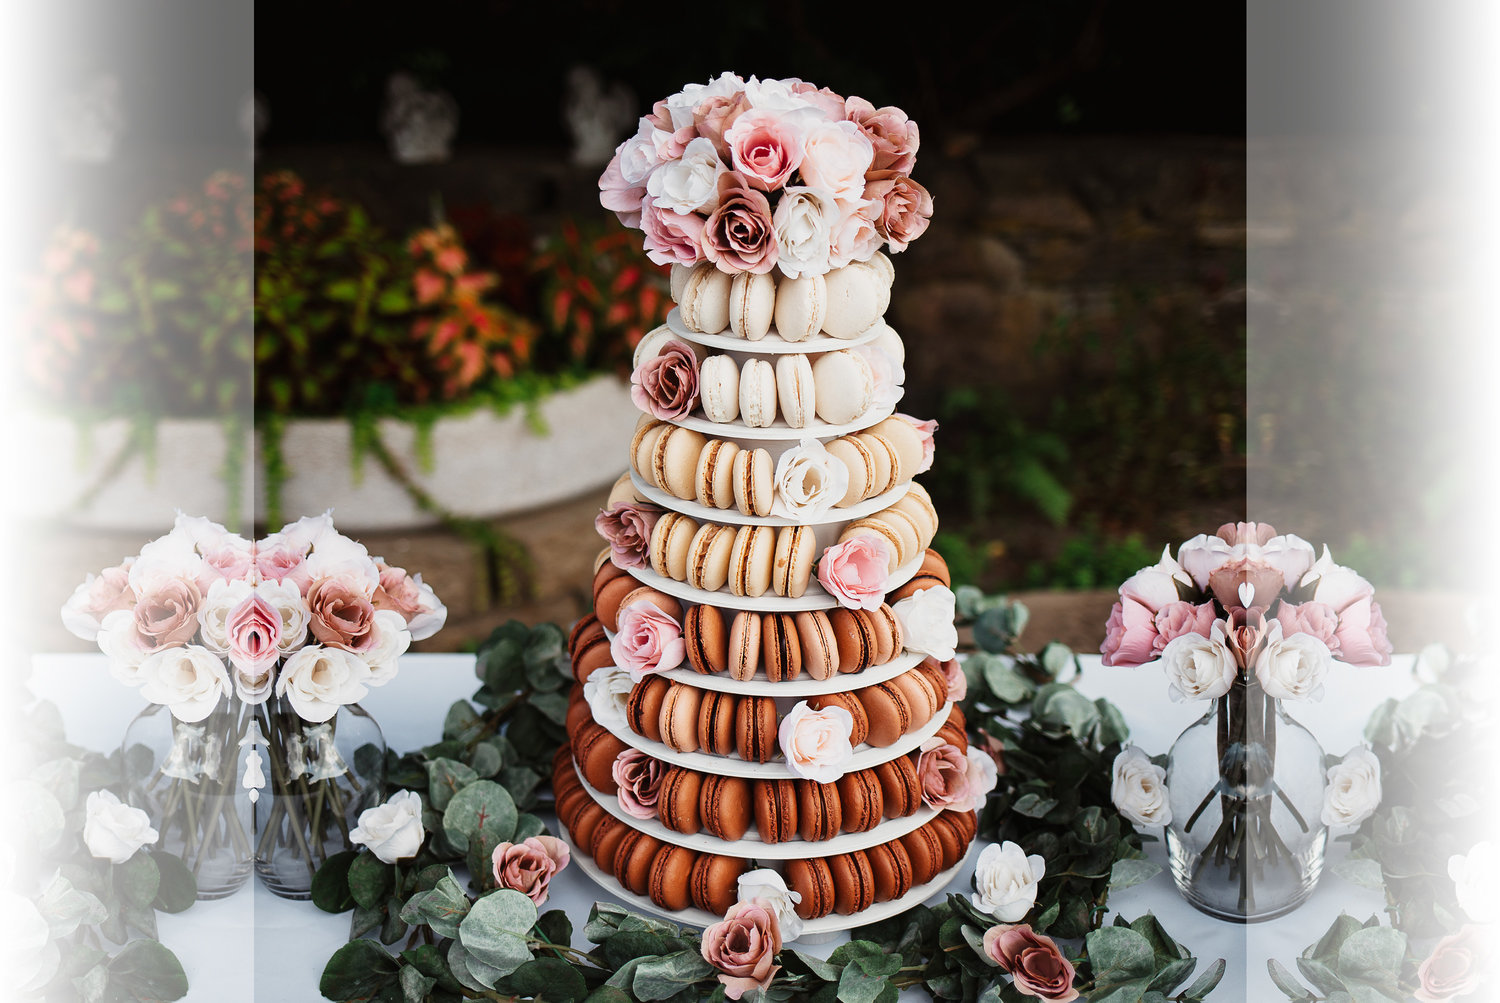 A macaron tower crafted with love by Mariela’s Sweets